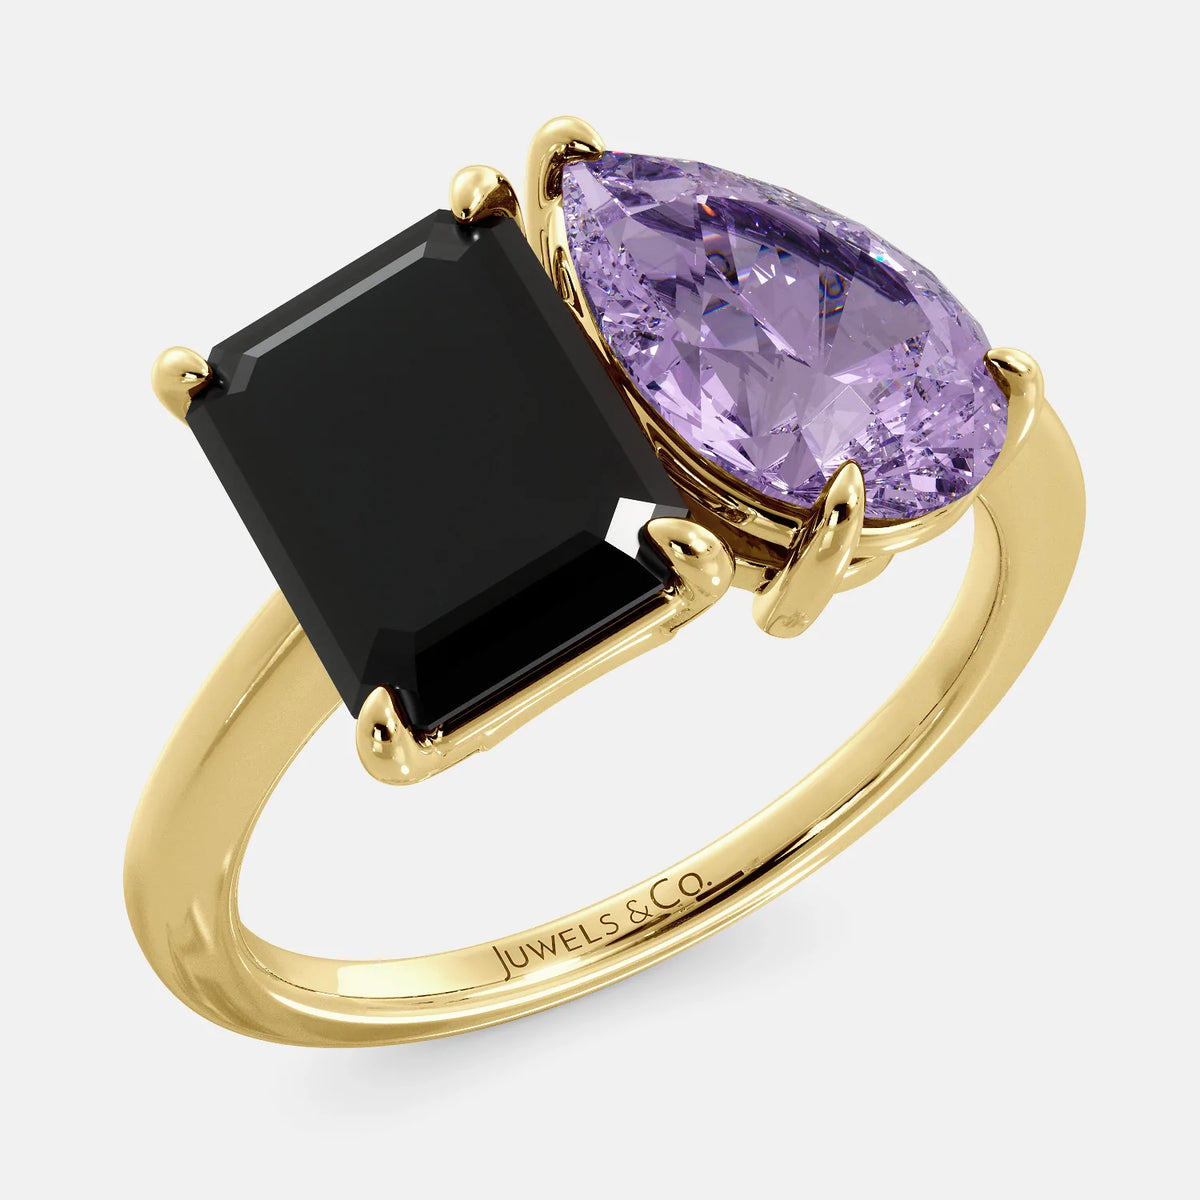 A toi et moi ring with a onyx stone in emerald cut and a pear-shaped stone. The onyx is a deep dark color and the pear-shaped stone can be customized to represent the birth month stone of the wearer or a loved one. The ring is made of 14k gold and is available in all sizes. This ring is a perfect gift for any occasion, and it can be customized to make it truly unique.